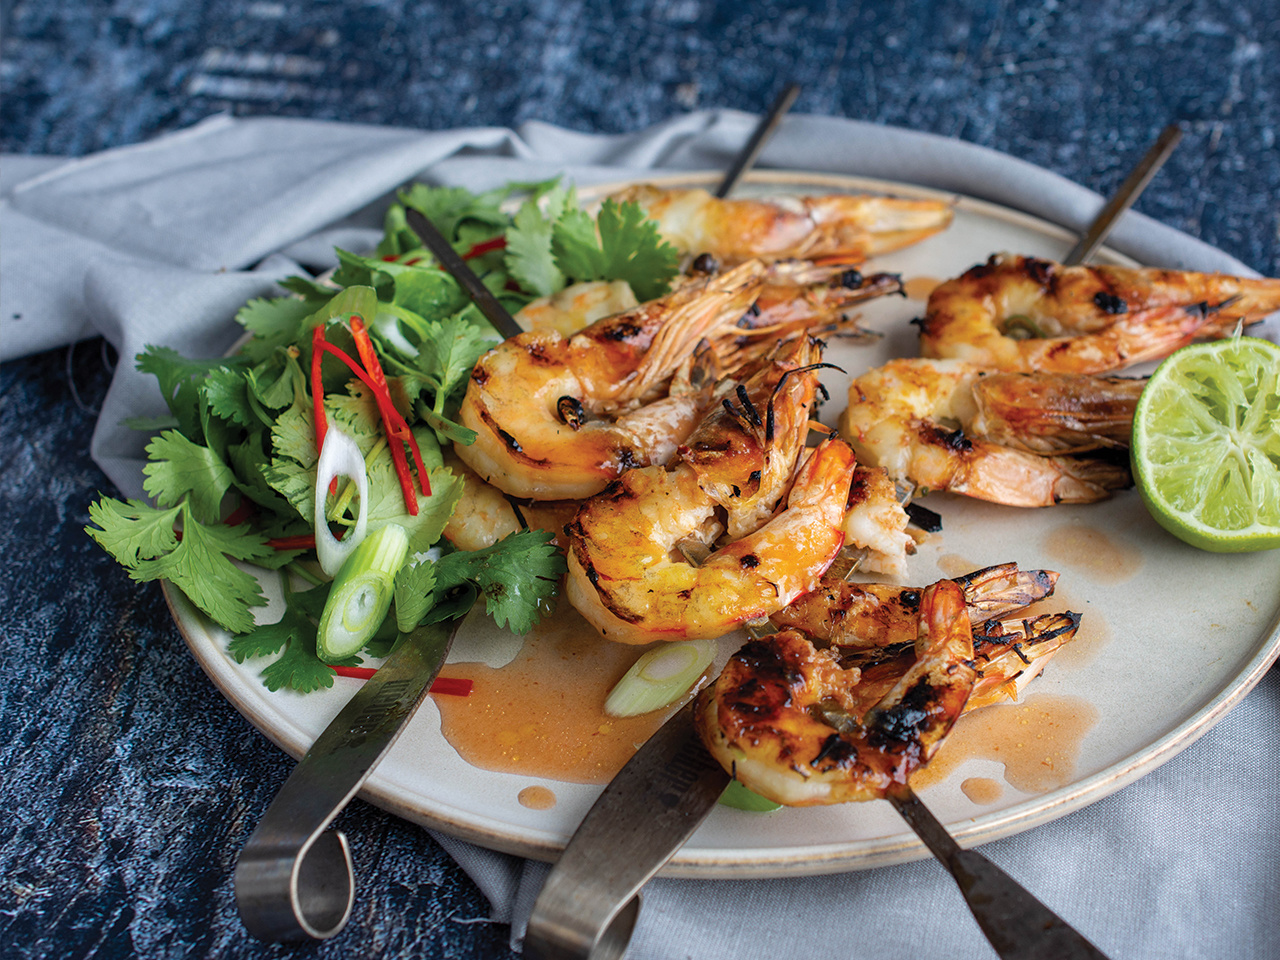  Sweet and Sour Prawns

